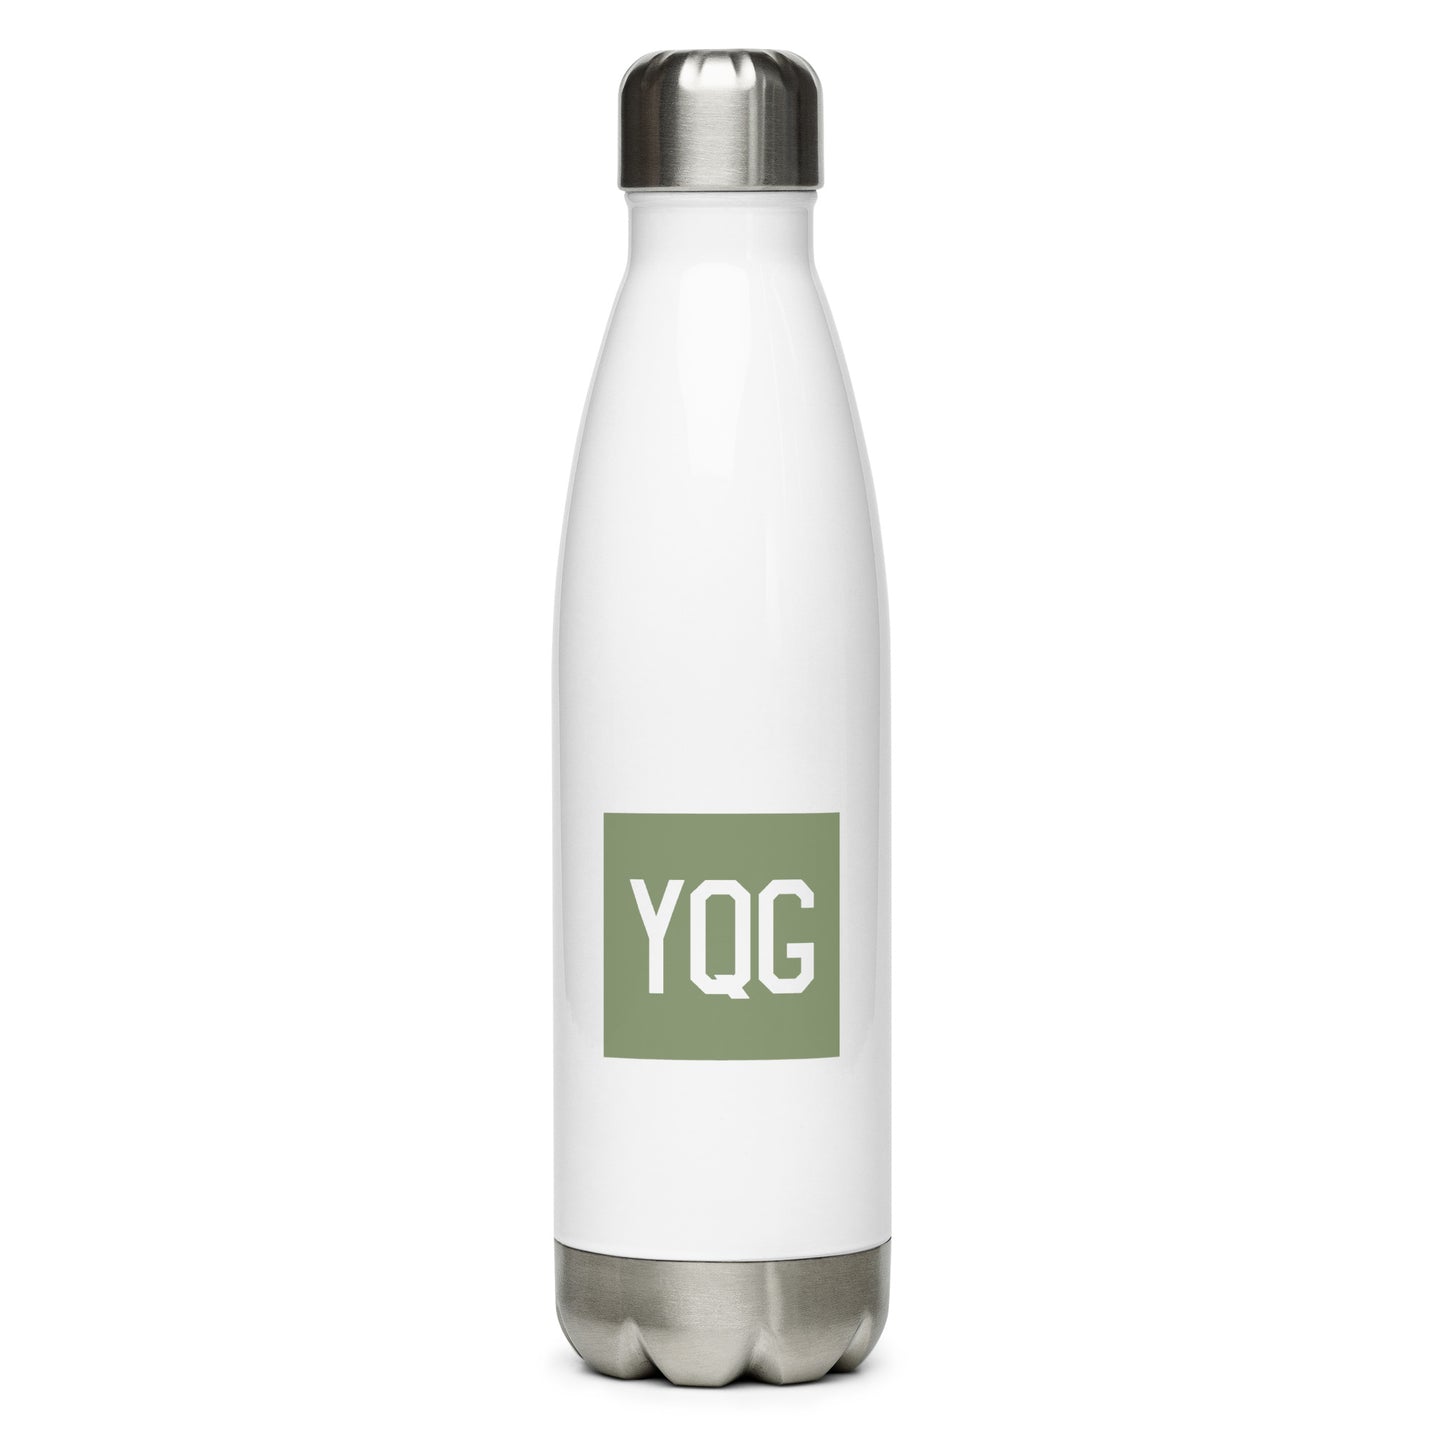 Aviation Gift Water Bottle - Camo Green • YQG Windsor • YHM Designs - Image 01